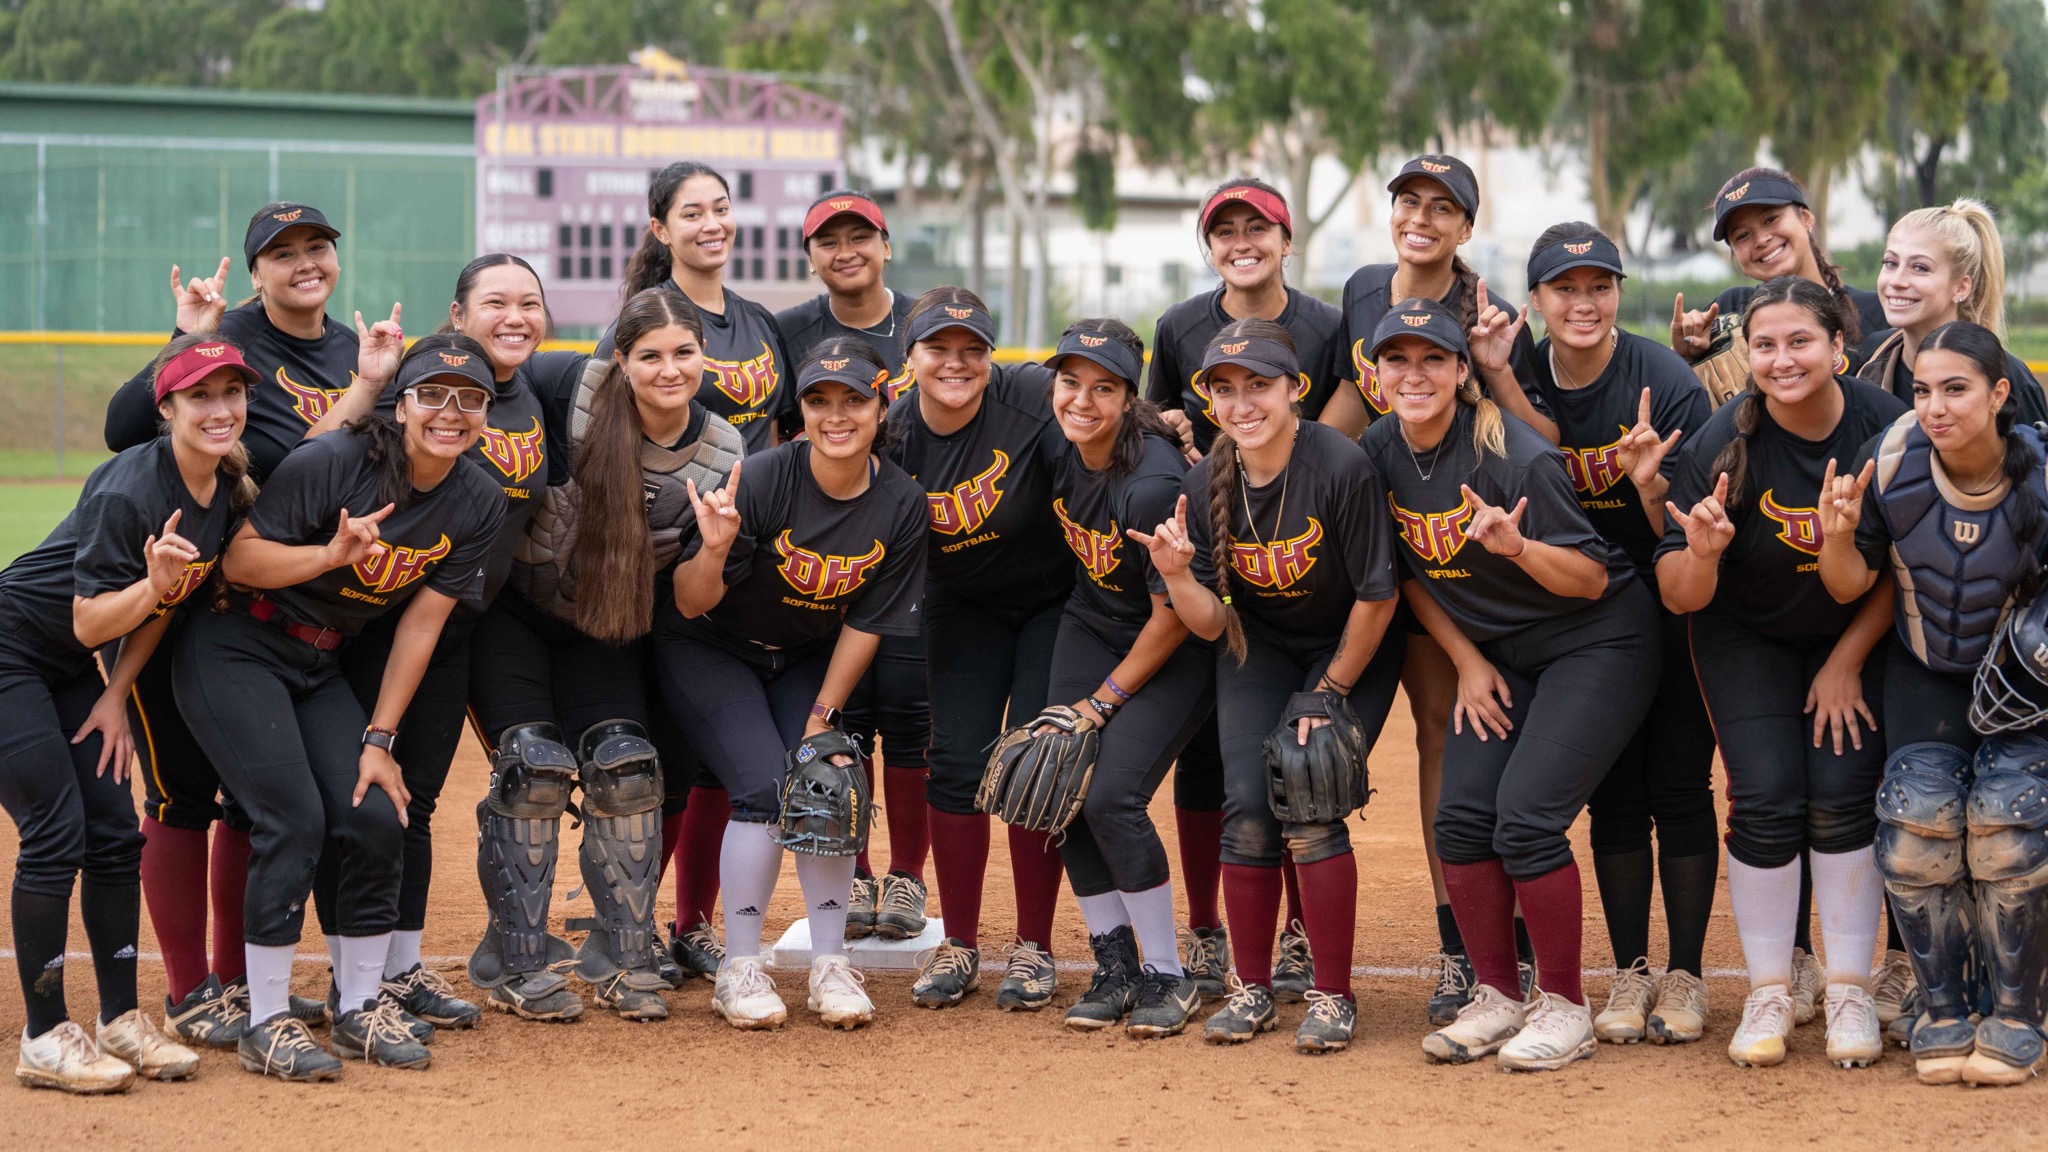 Toros Softball: Defining Commitment and Culture